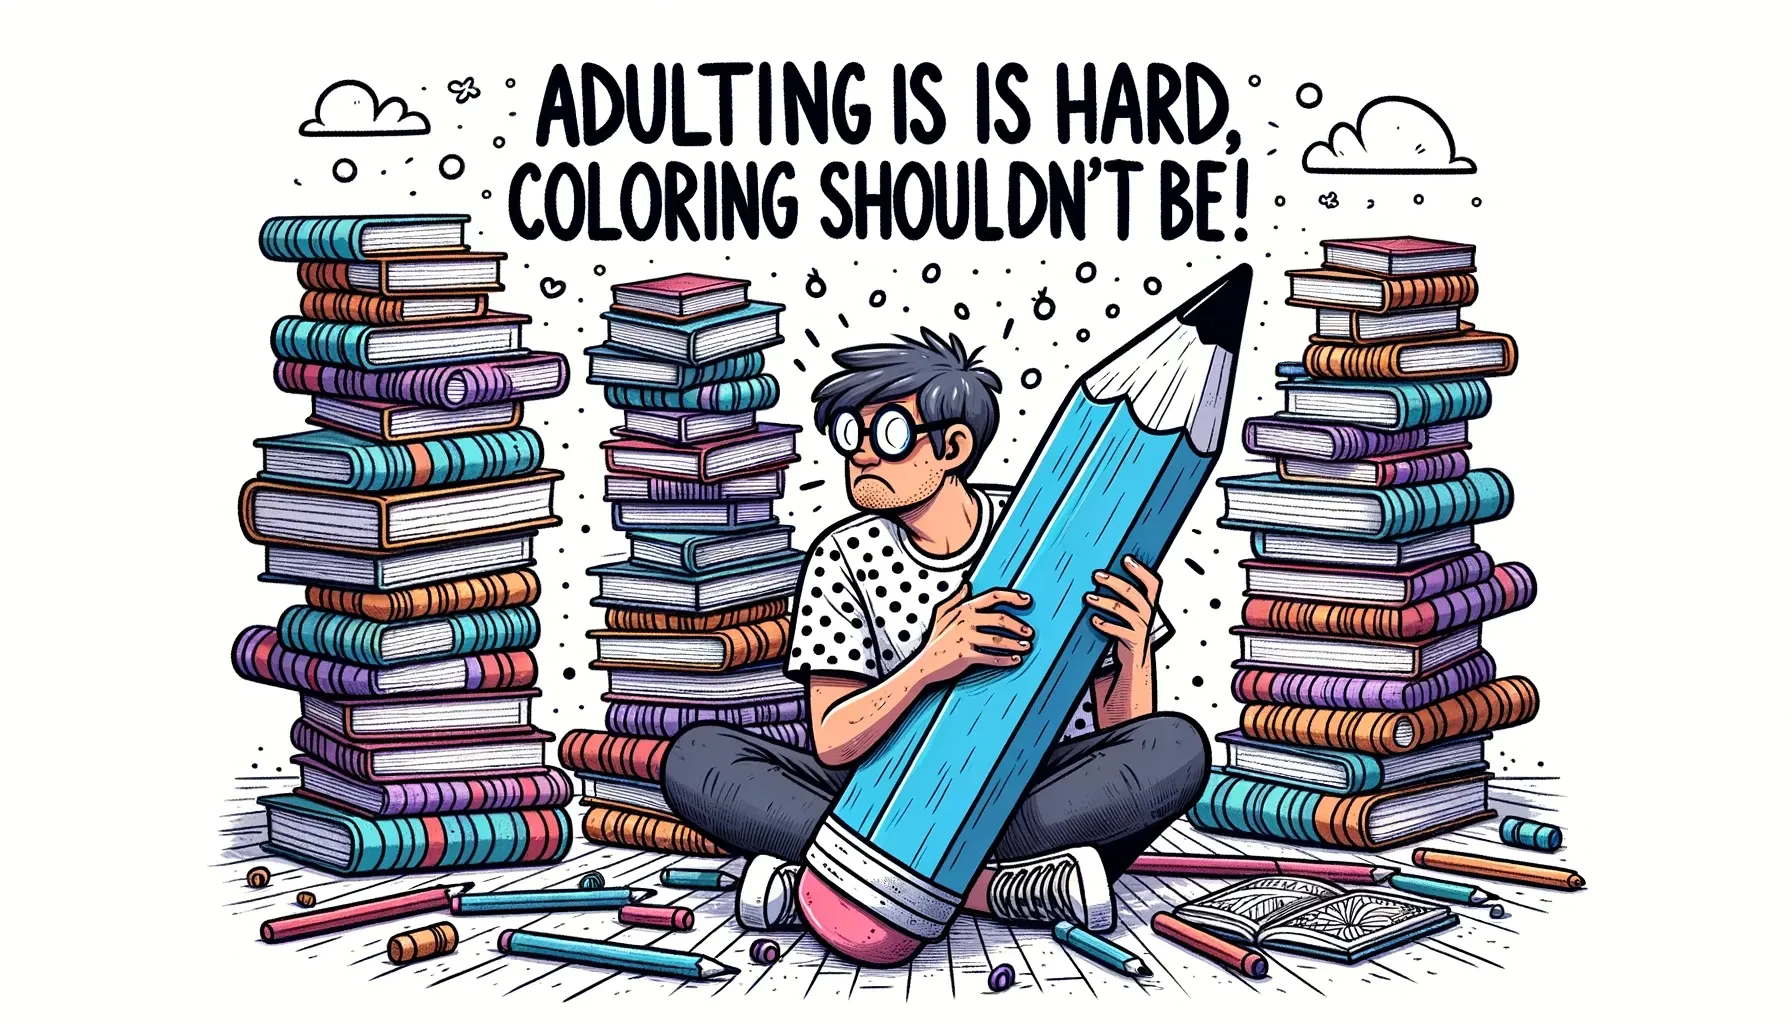 Top 5 Coloring Pencils for Stressed Out Adults